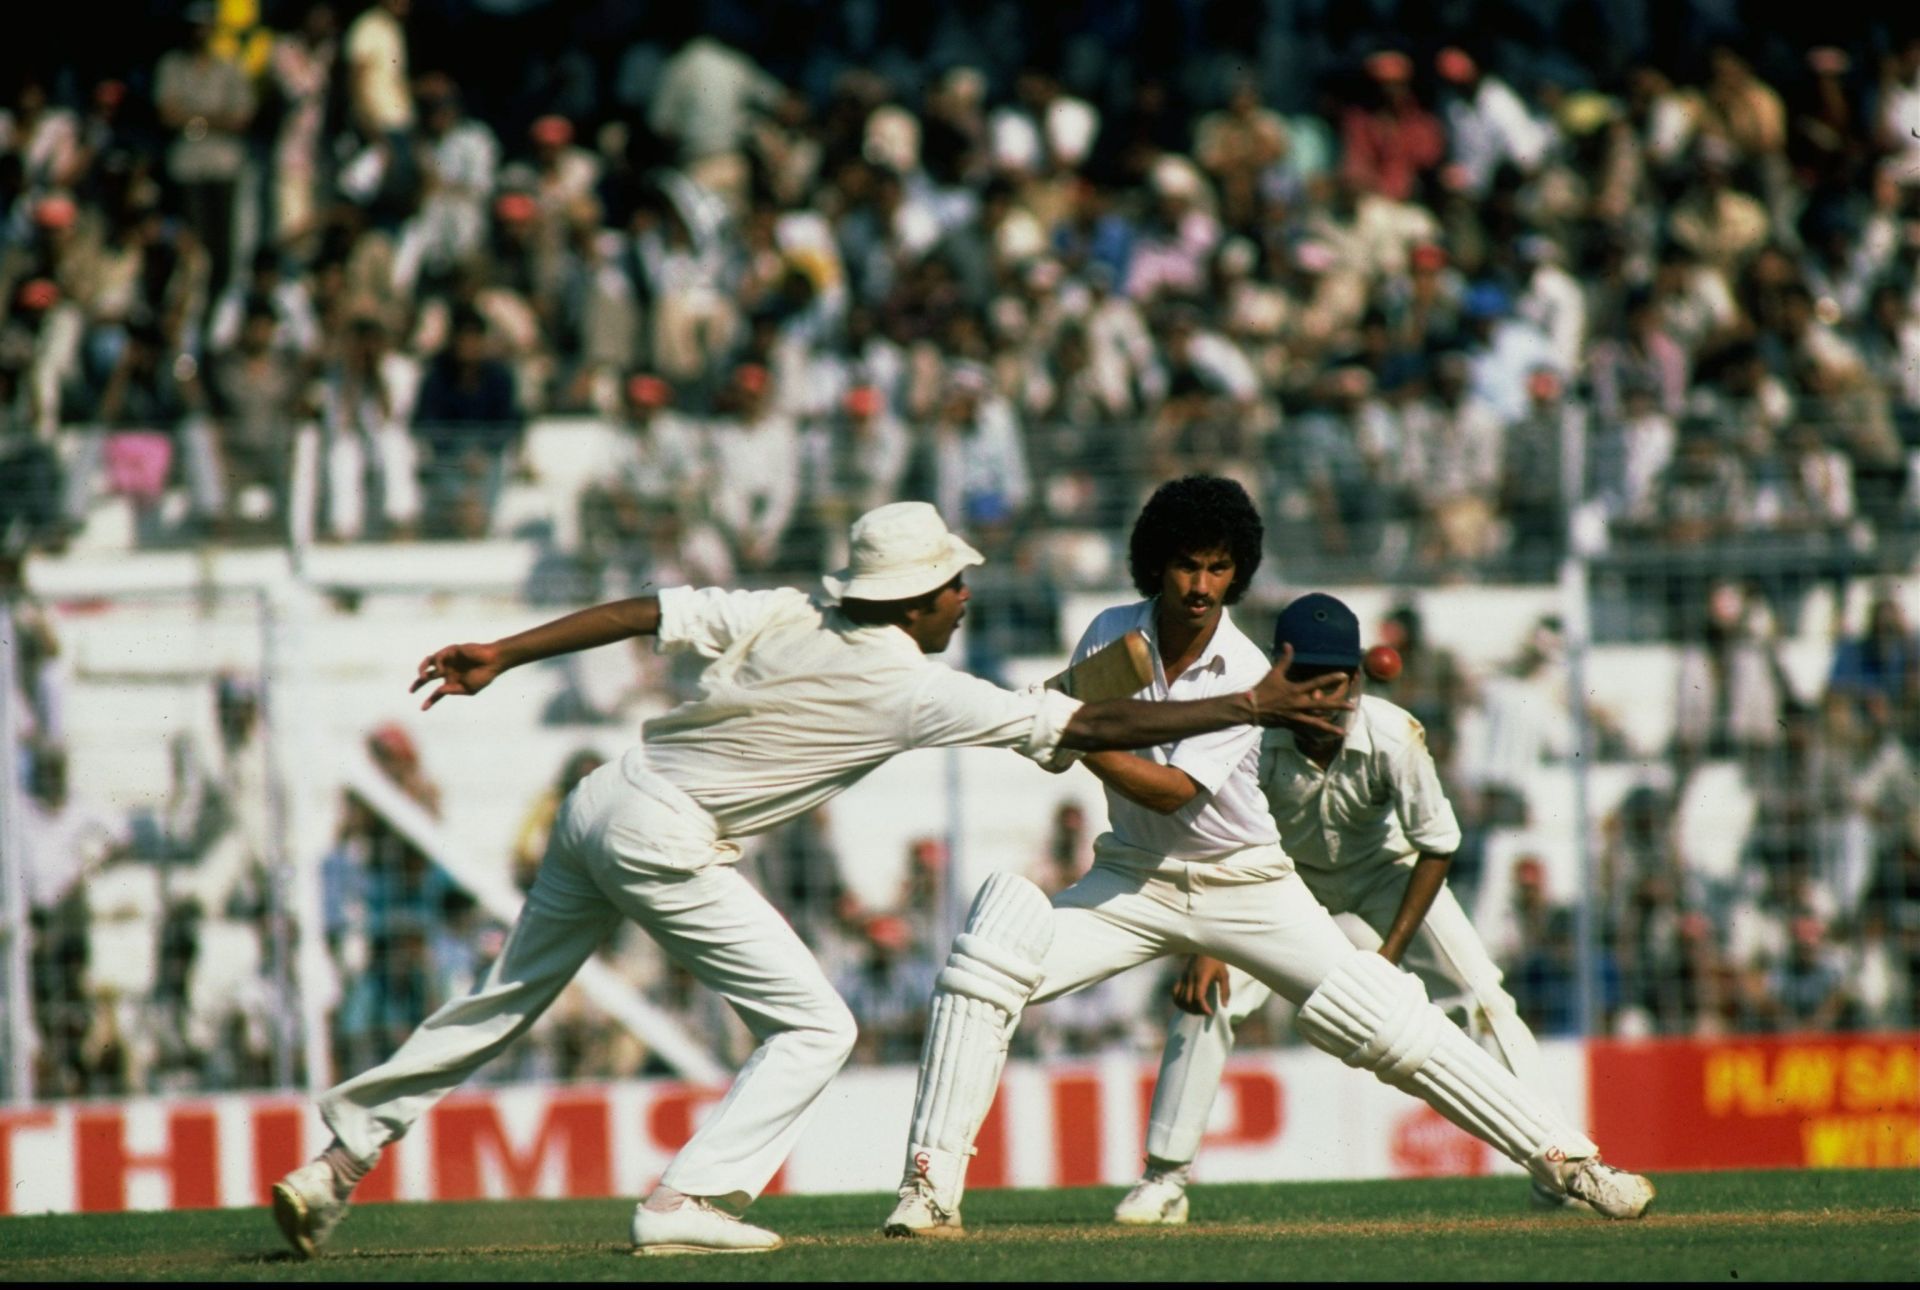 India was whitewashed for the first time in an ODI series back in 1983/84.